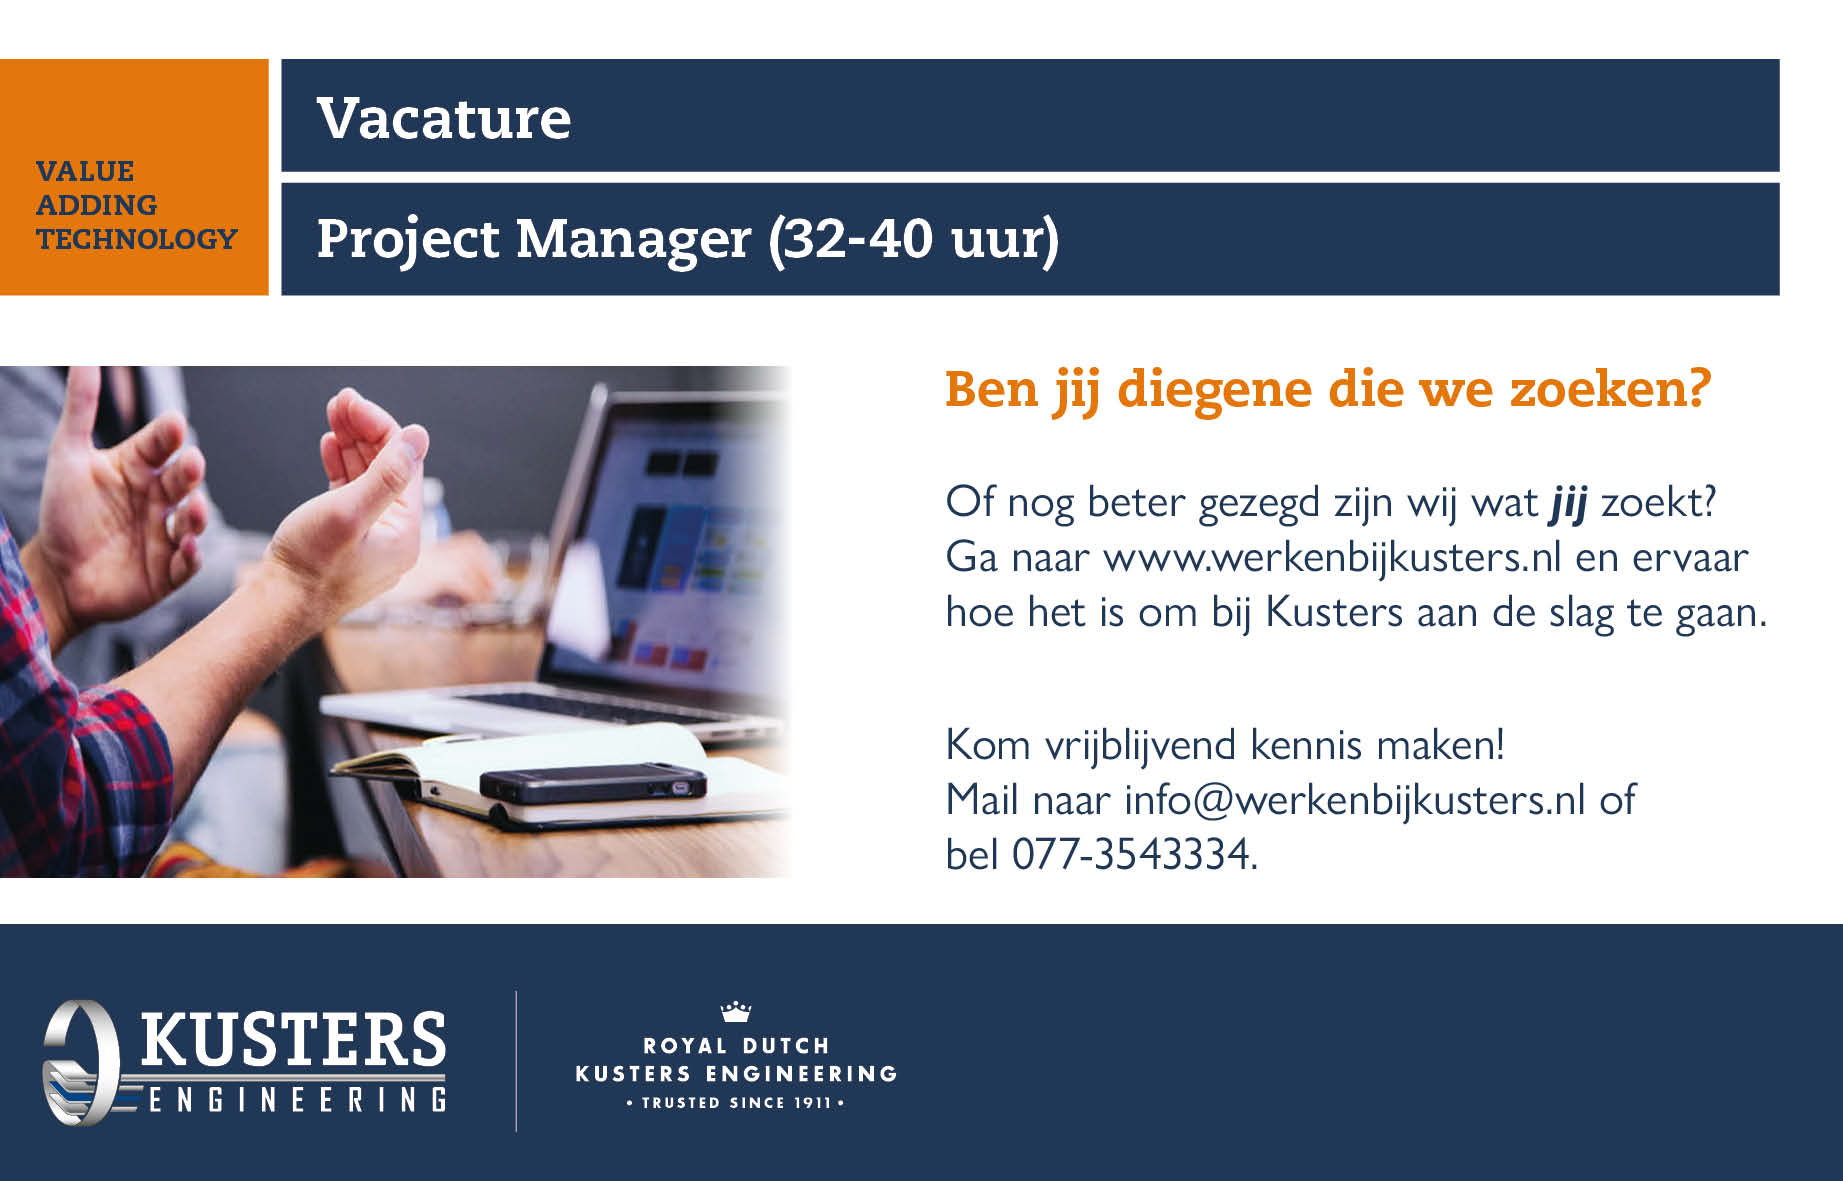 Social post vacature Project Manager 32-40 uur